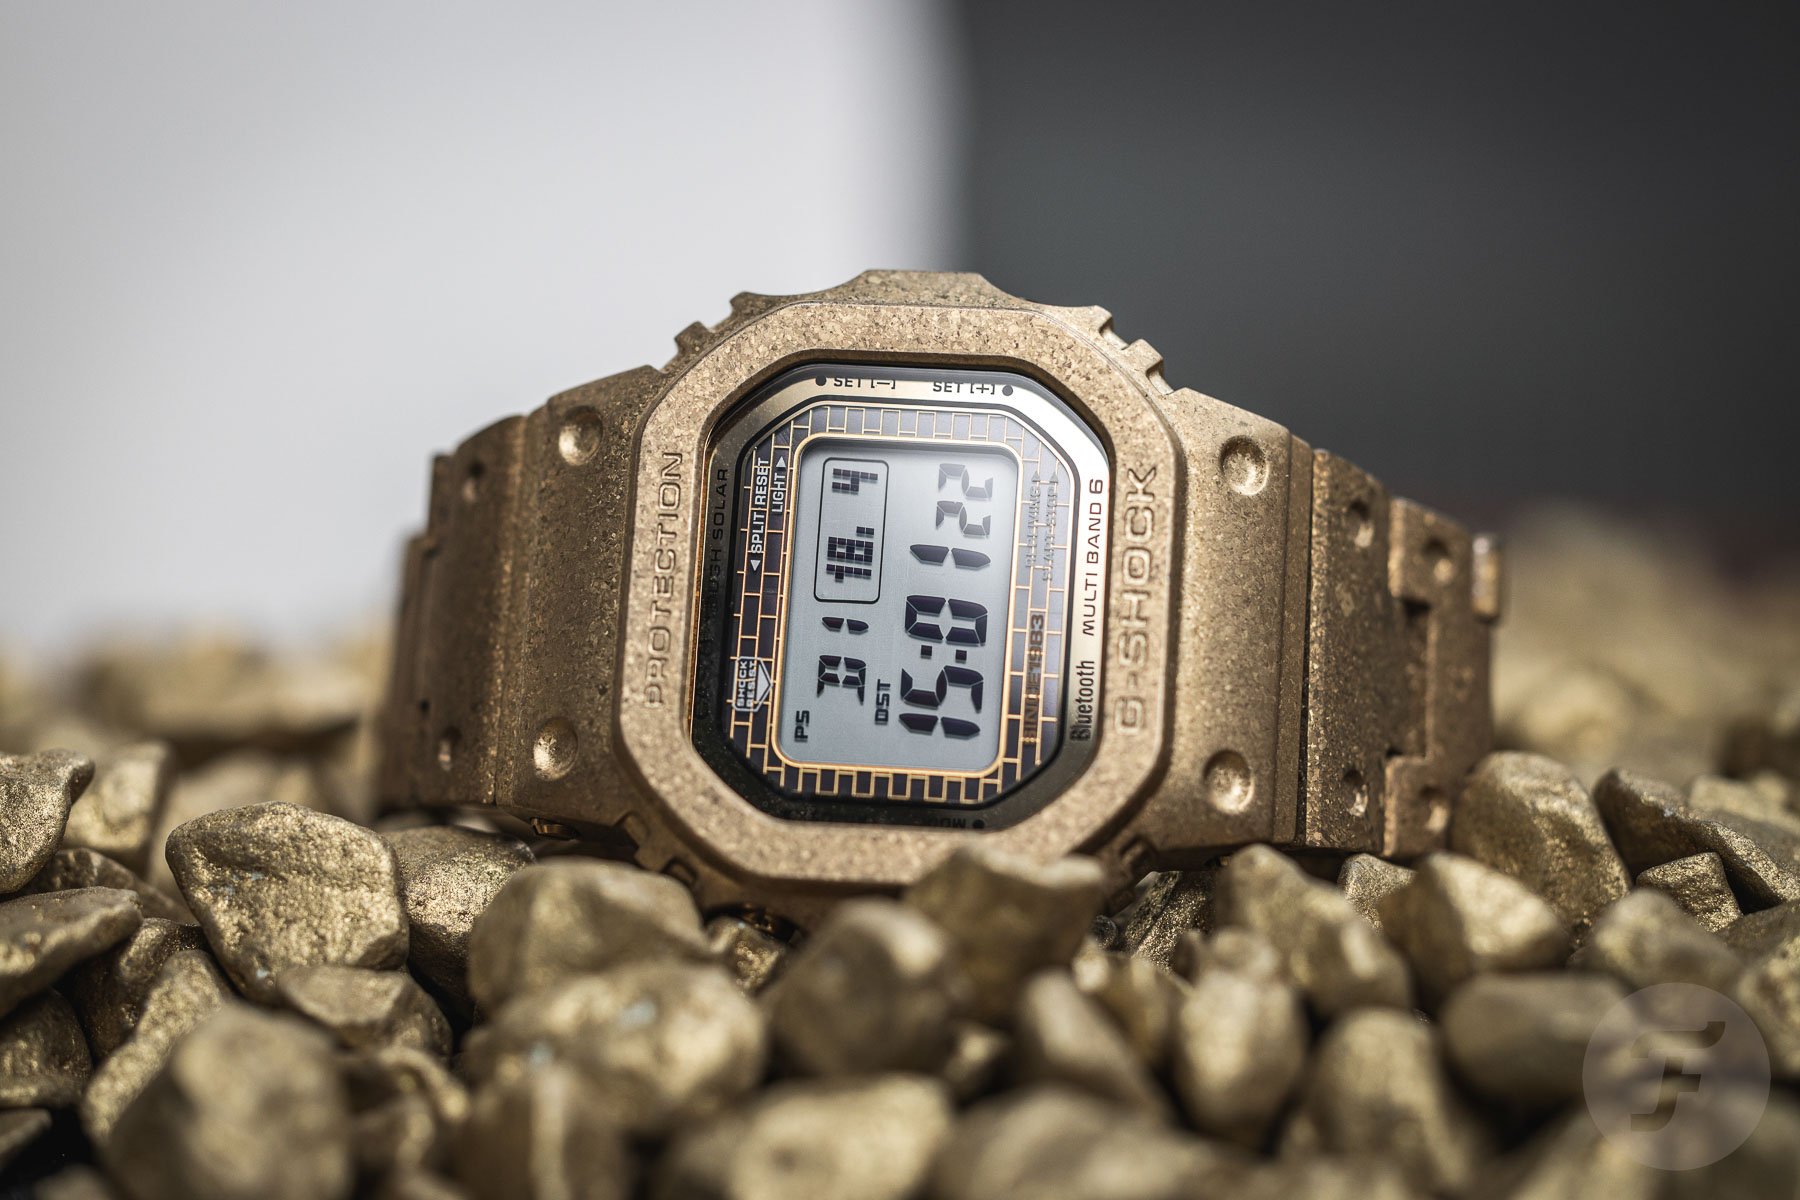 Introducing the new G-SHOCK 40th Anniversary Model: Recrystallized